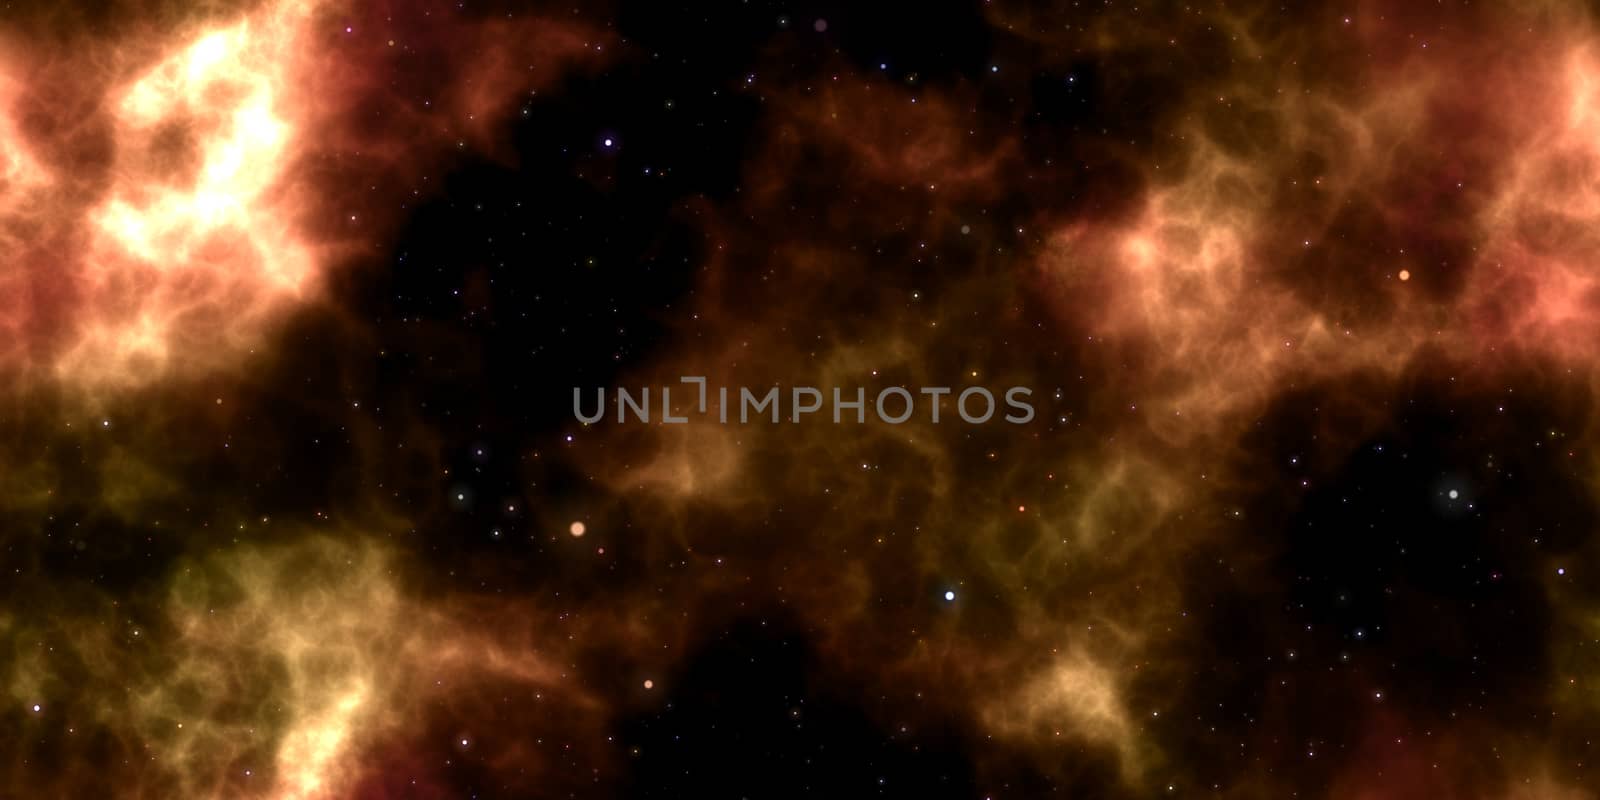 Orange Clouds on Night Sky Galaxy Background. Abstract Cosmos Infinity Texture. 3D Rendering. 3D Illustration. by sanches812